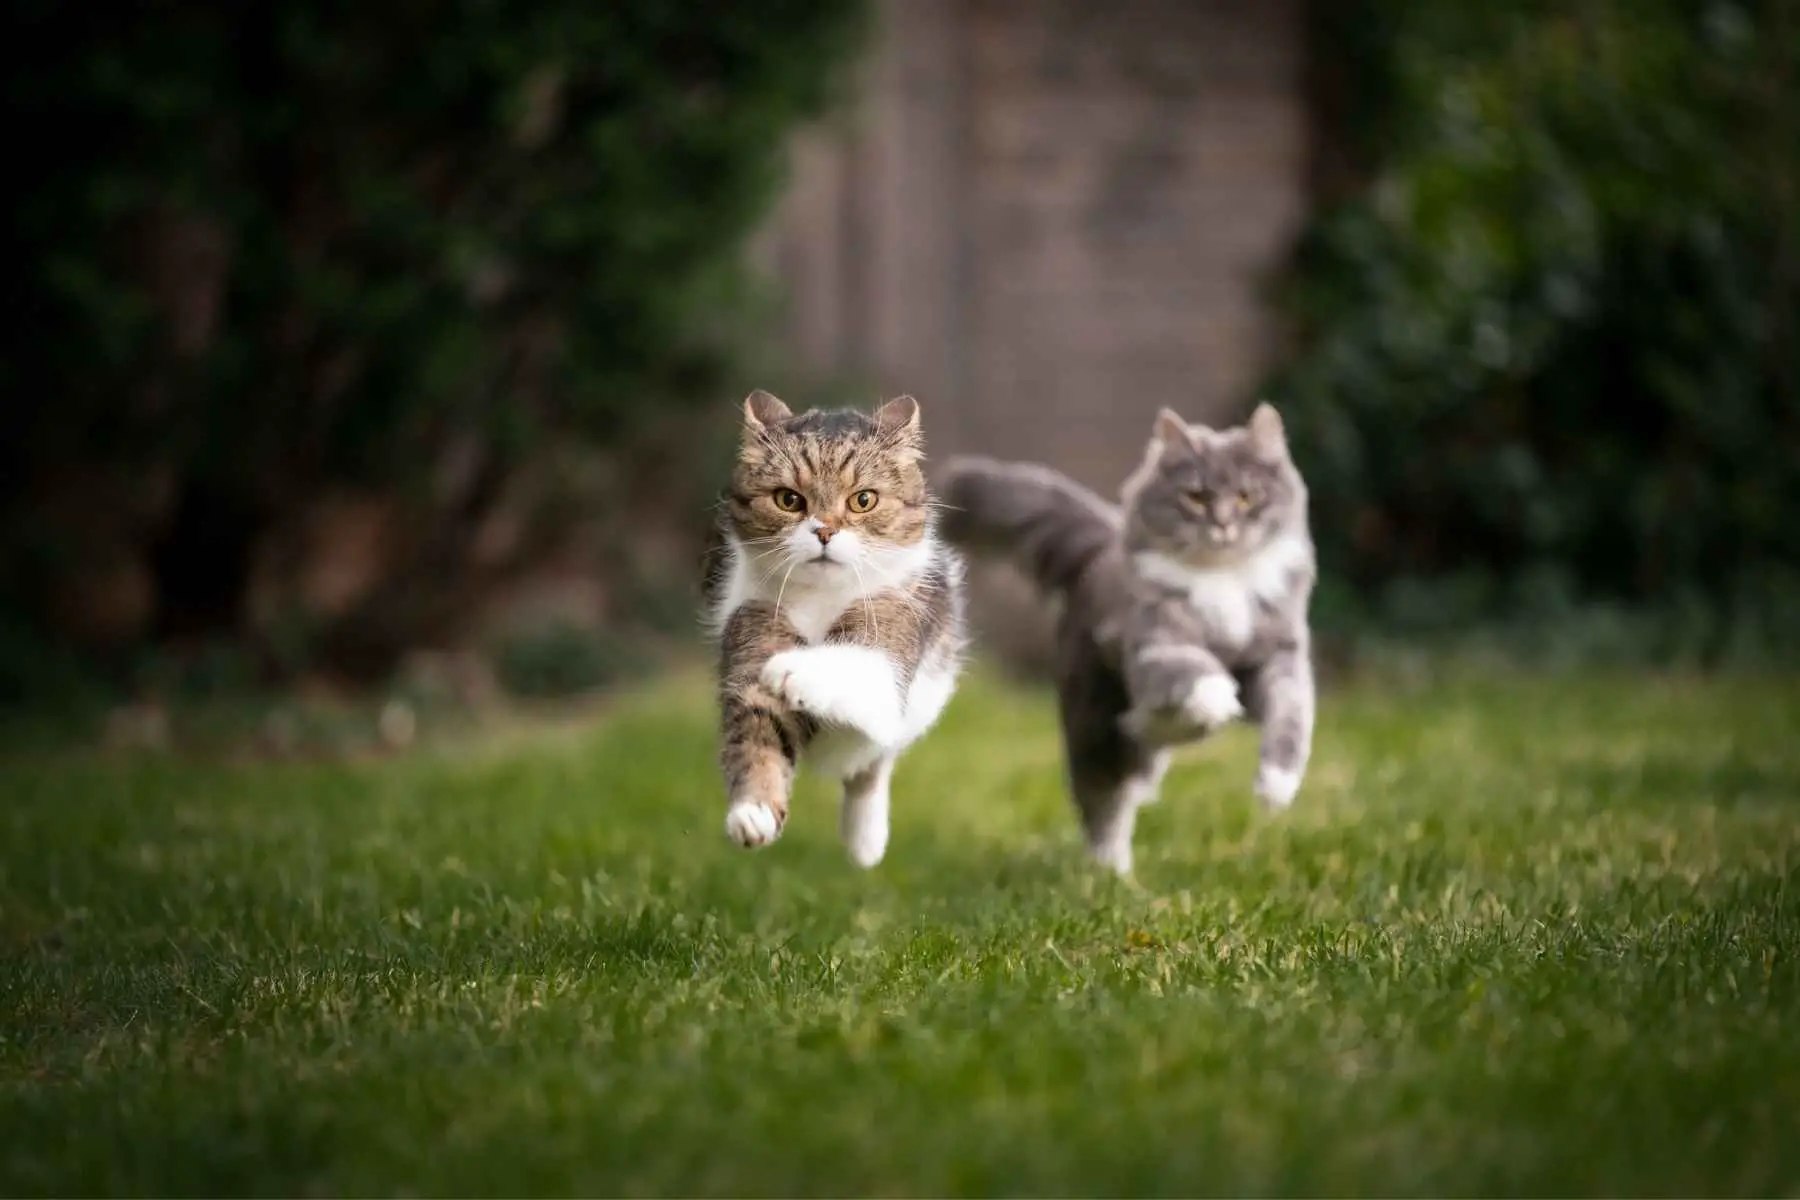 Two cats playing in the backyard